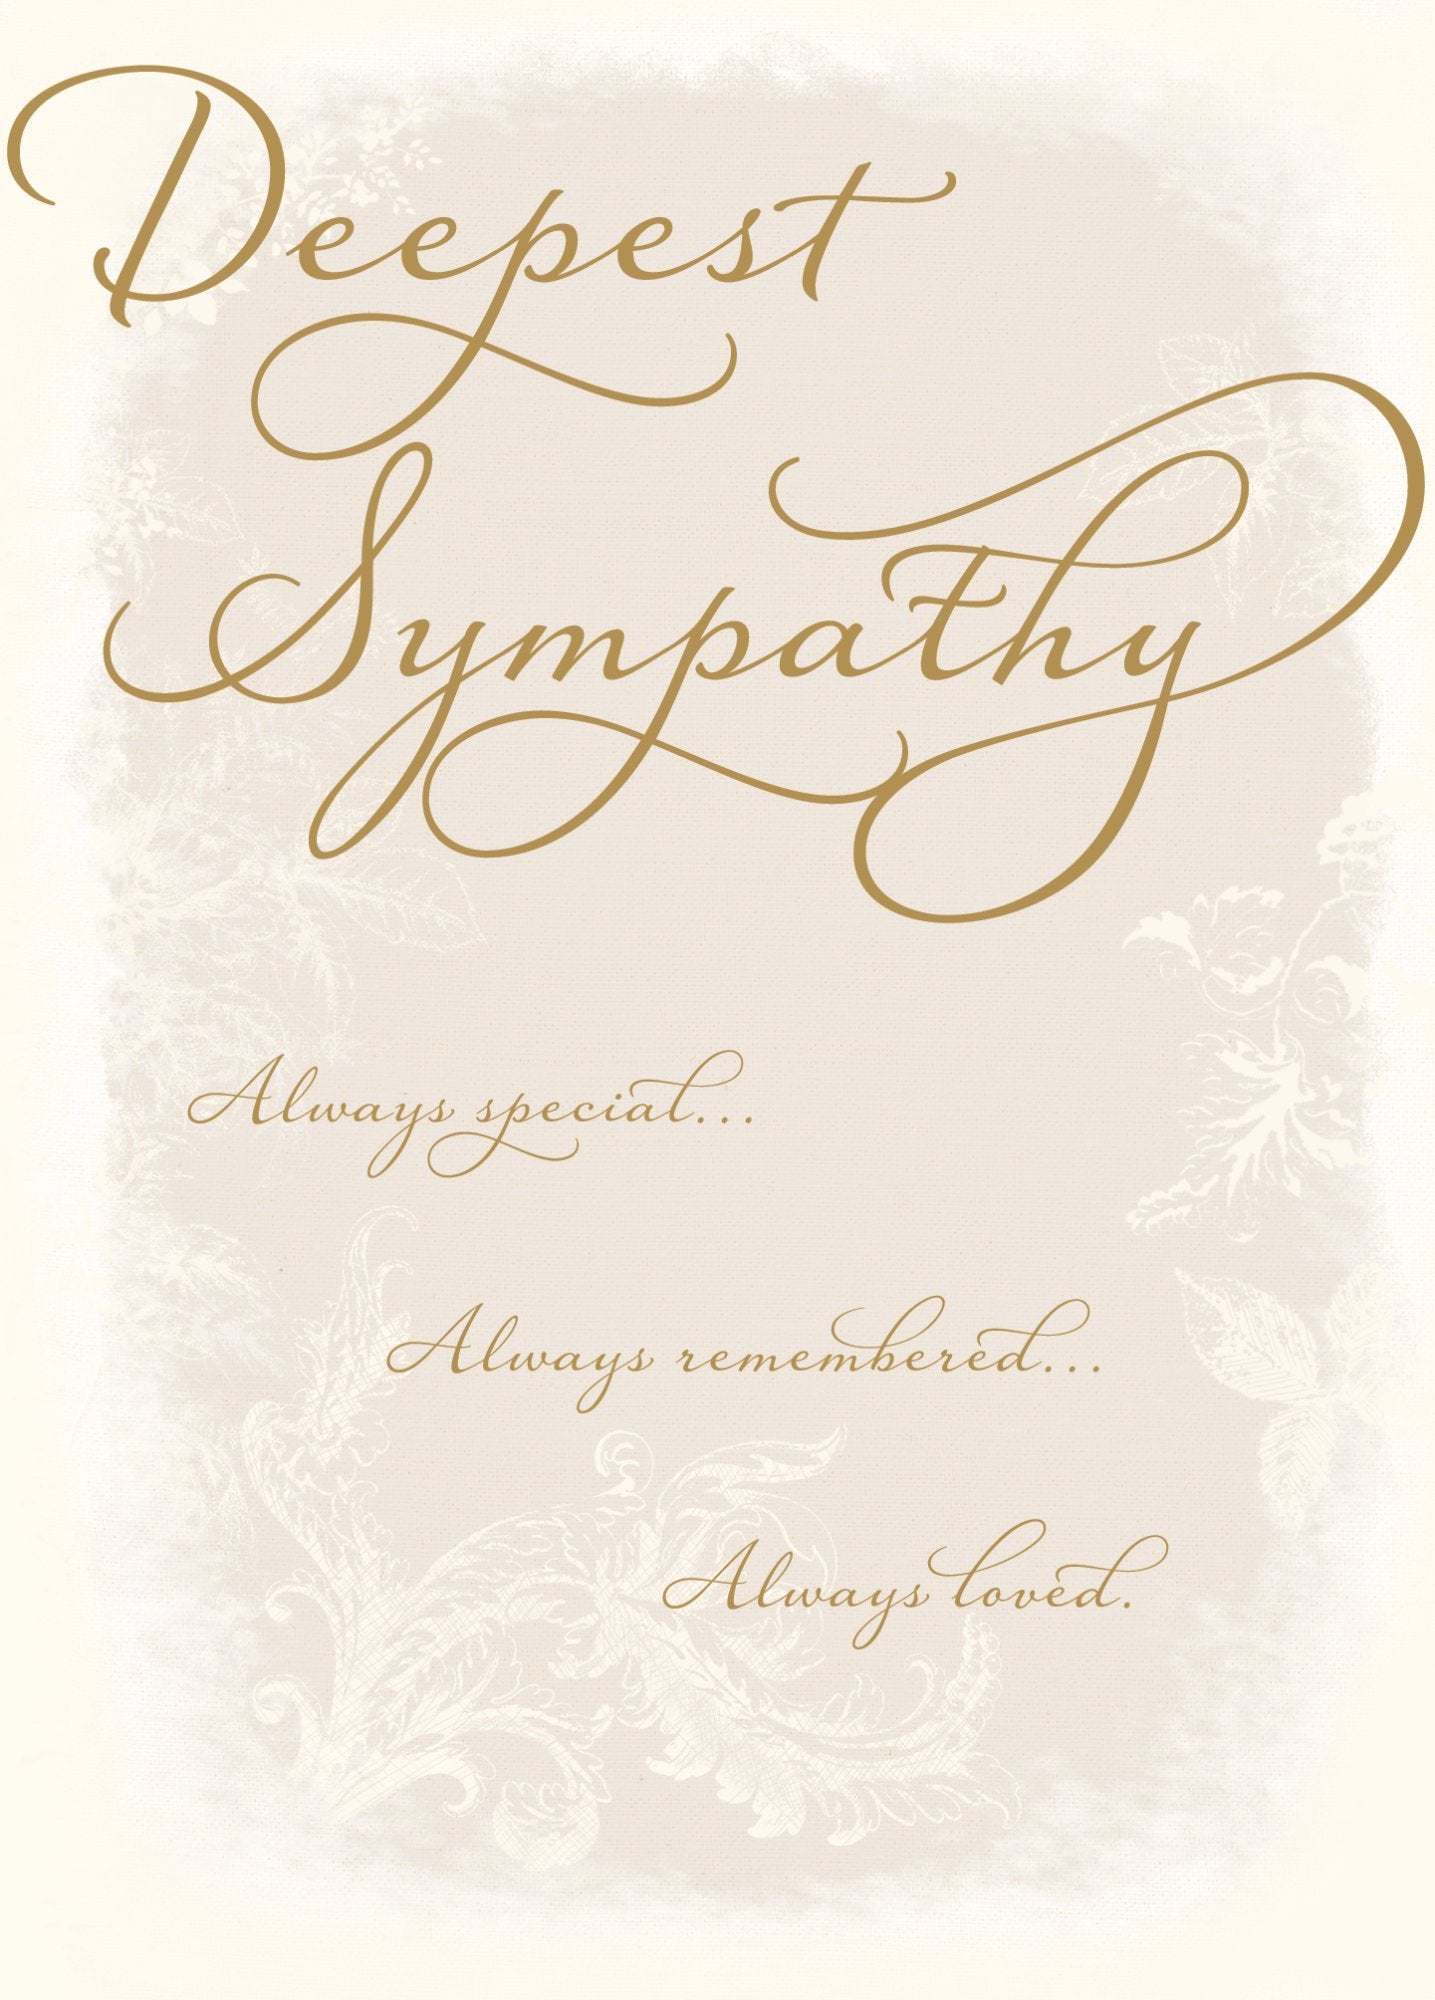 Photograph of Deepest Sympathy Always Loved Greetings Card at Nicole's Shop